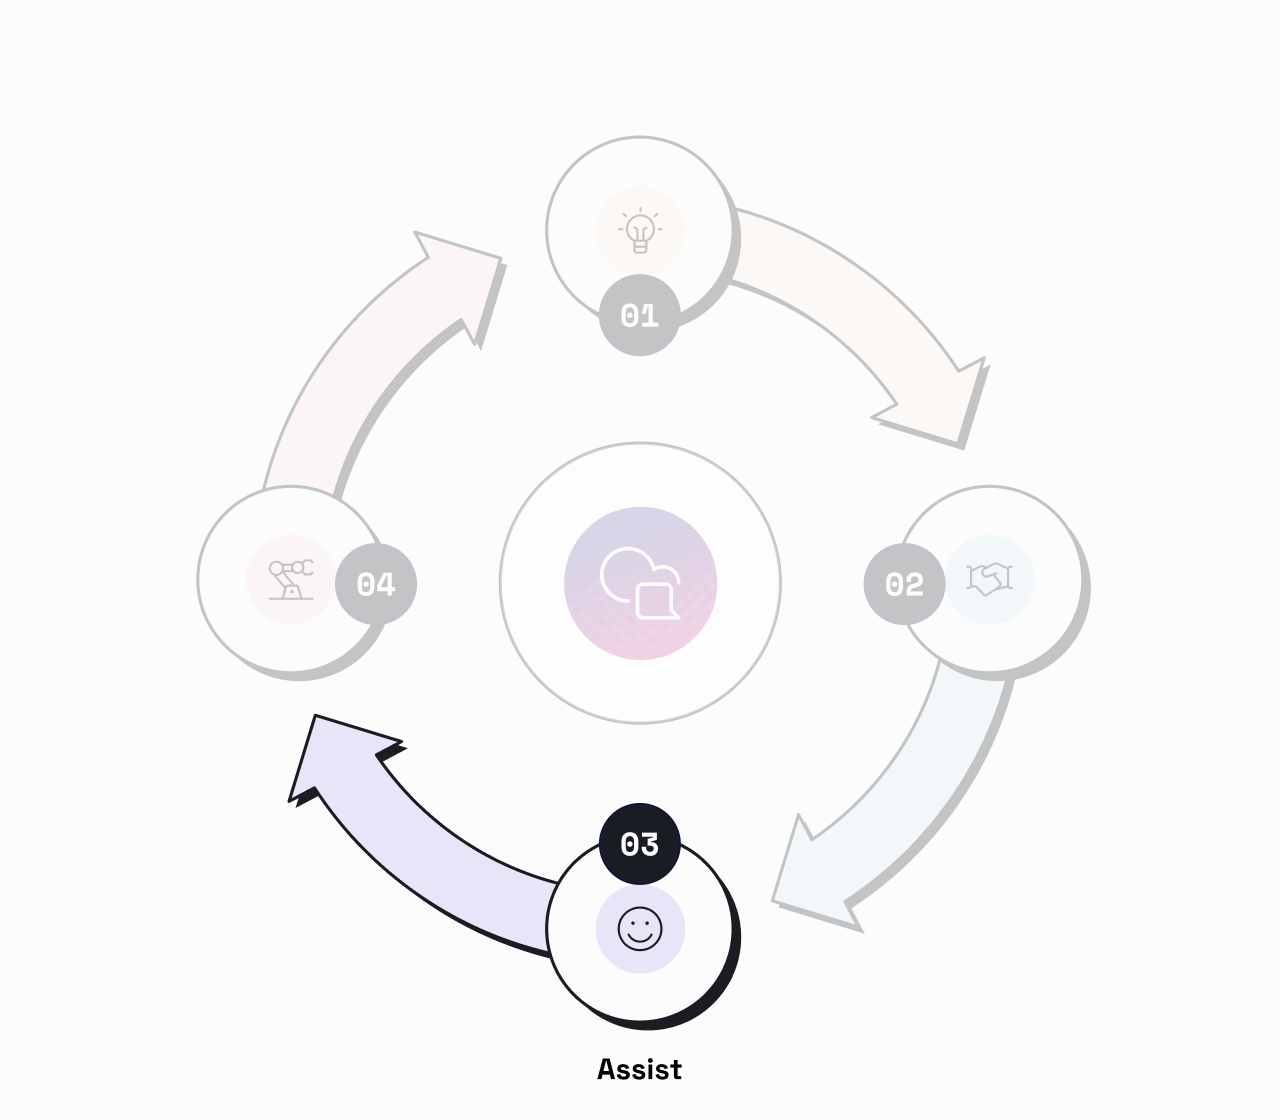 Assist phase of Conversational Flywheel, where omnichannel customer service tools can enhance the customer experience